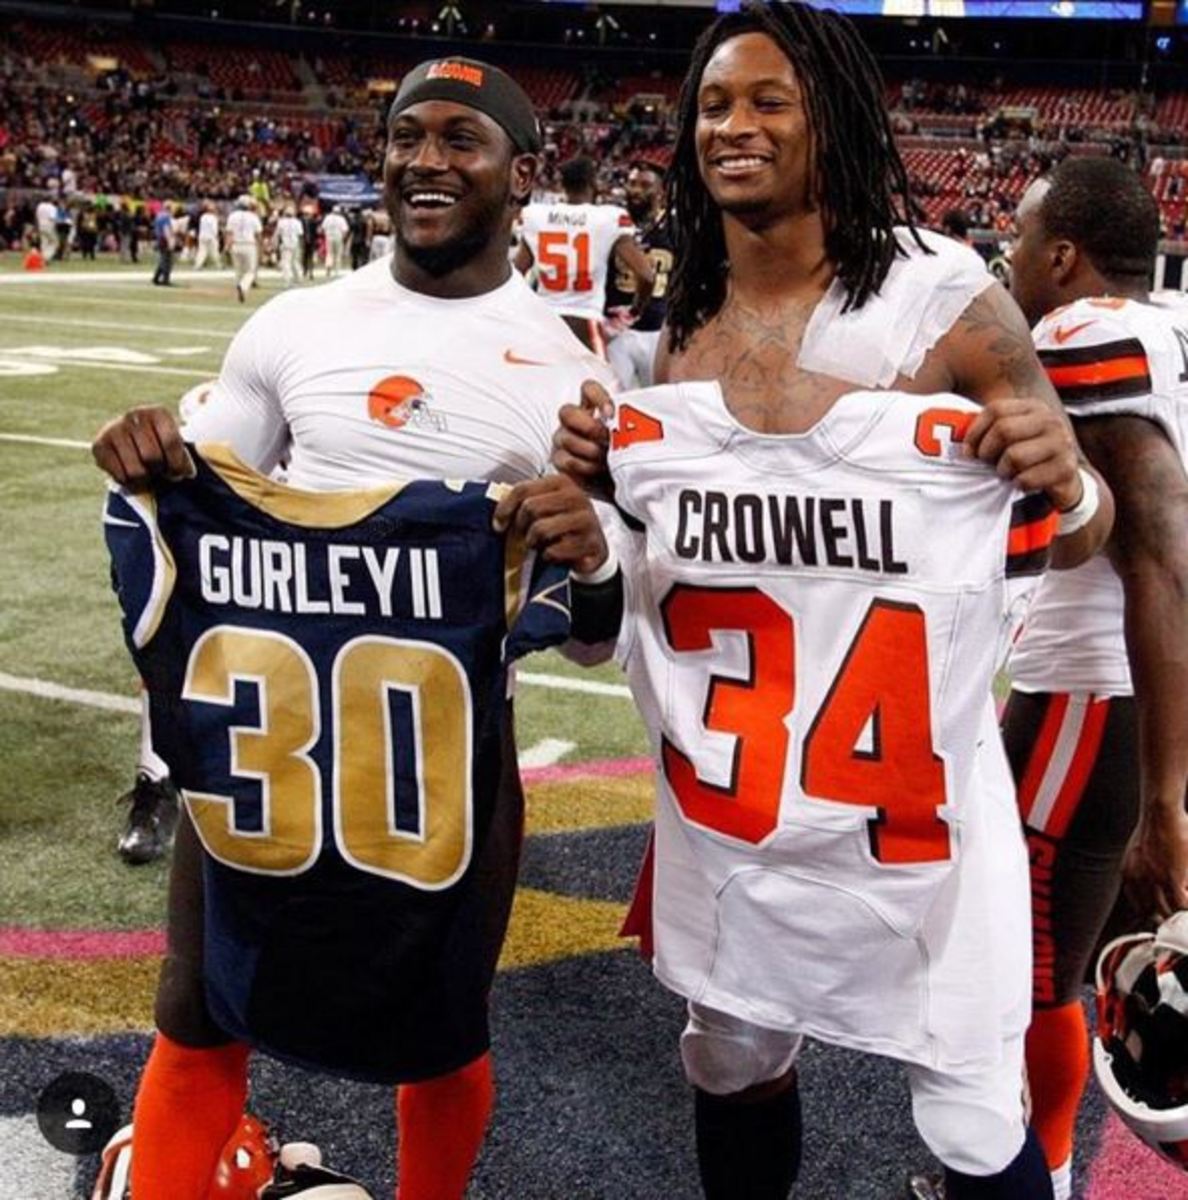 Todd Gurley and Isiah Crowell do a jersey swap.